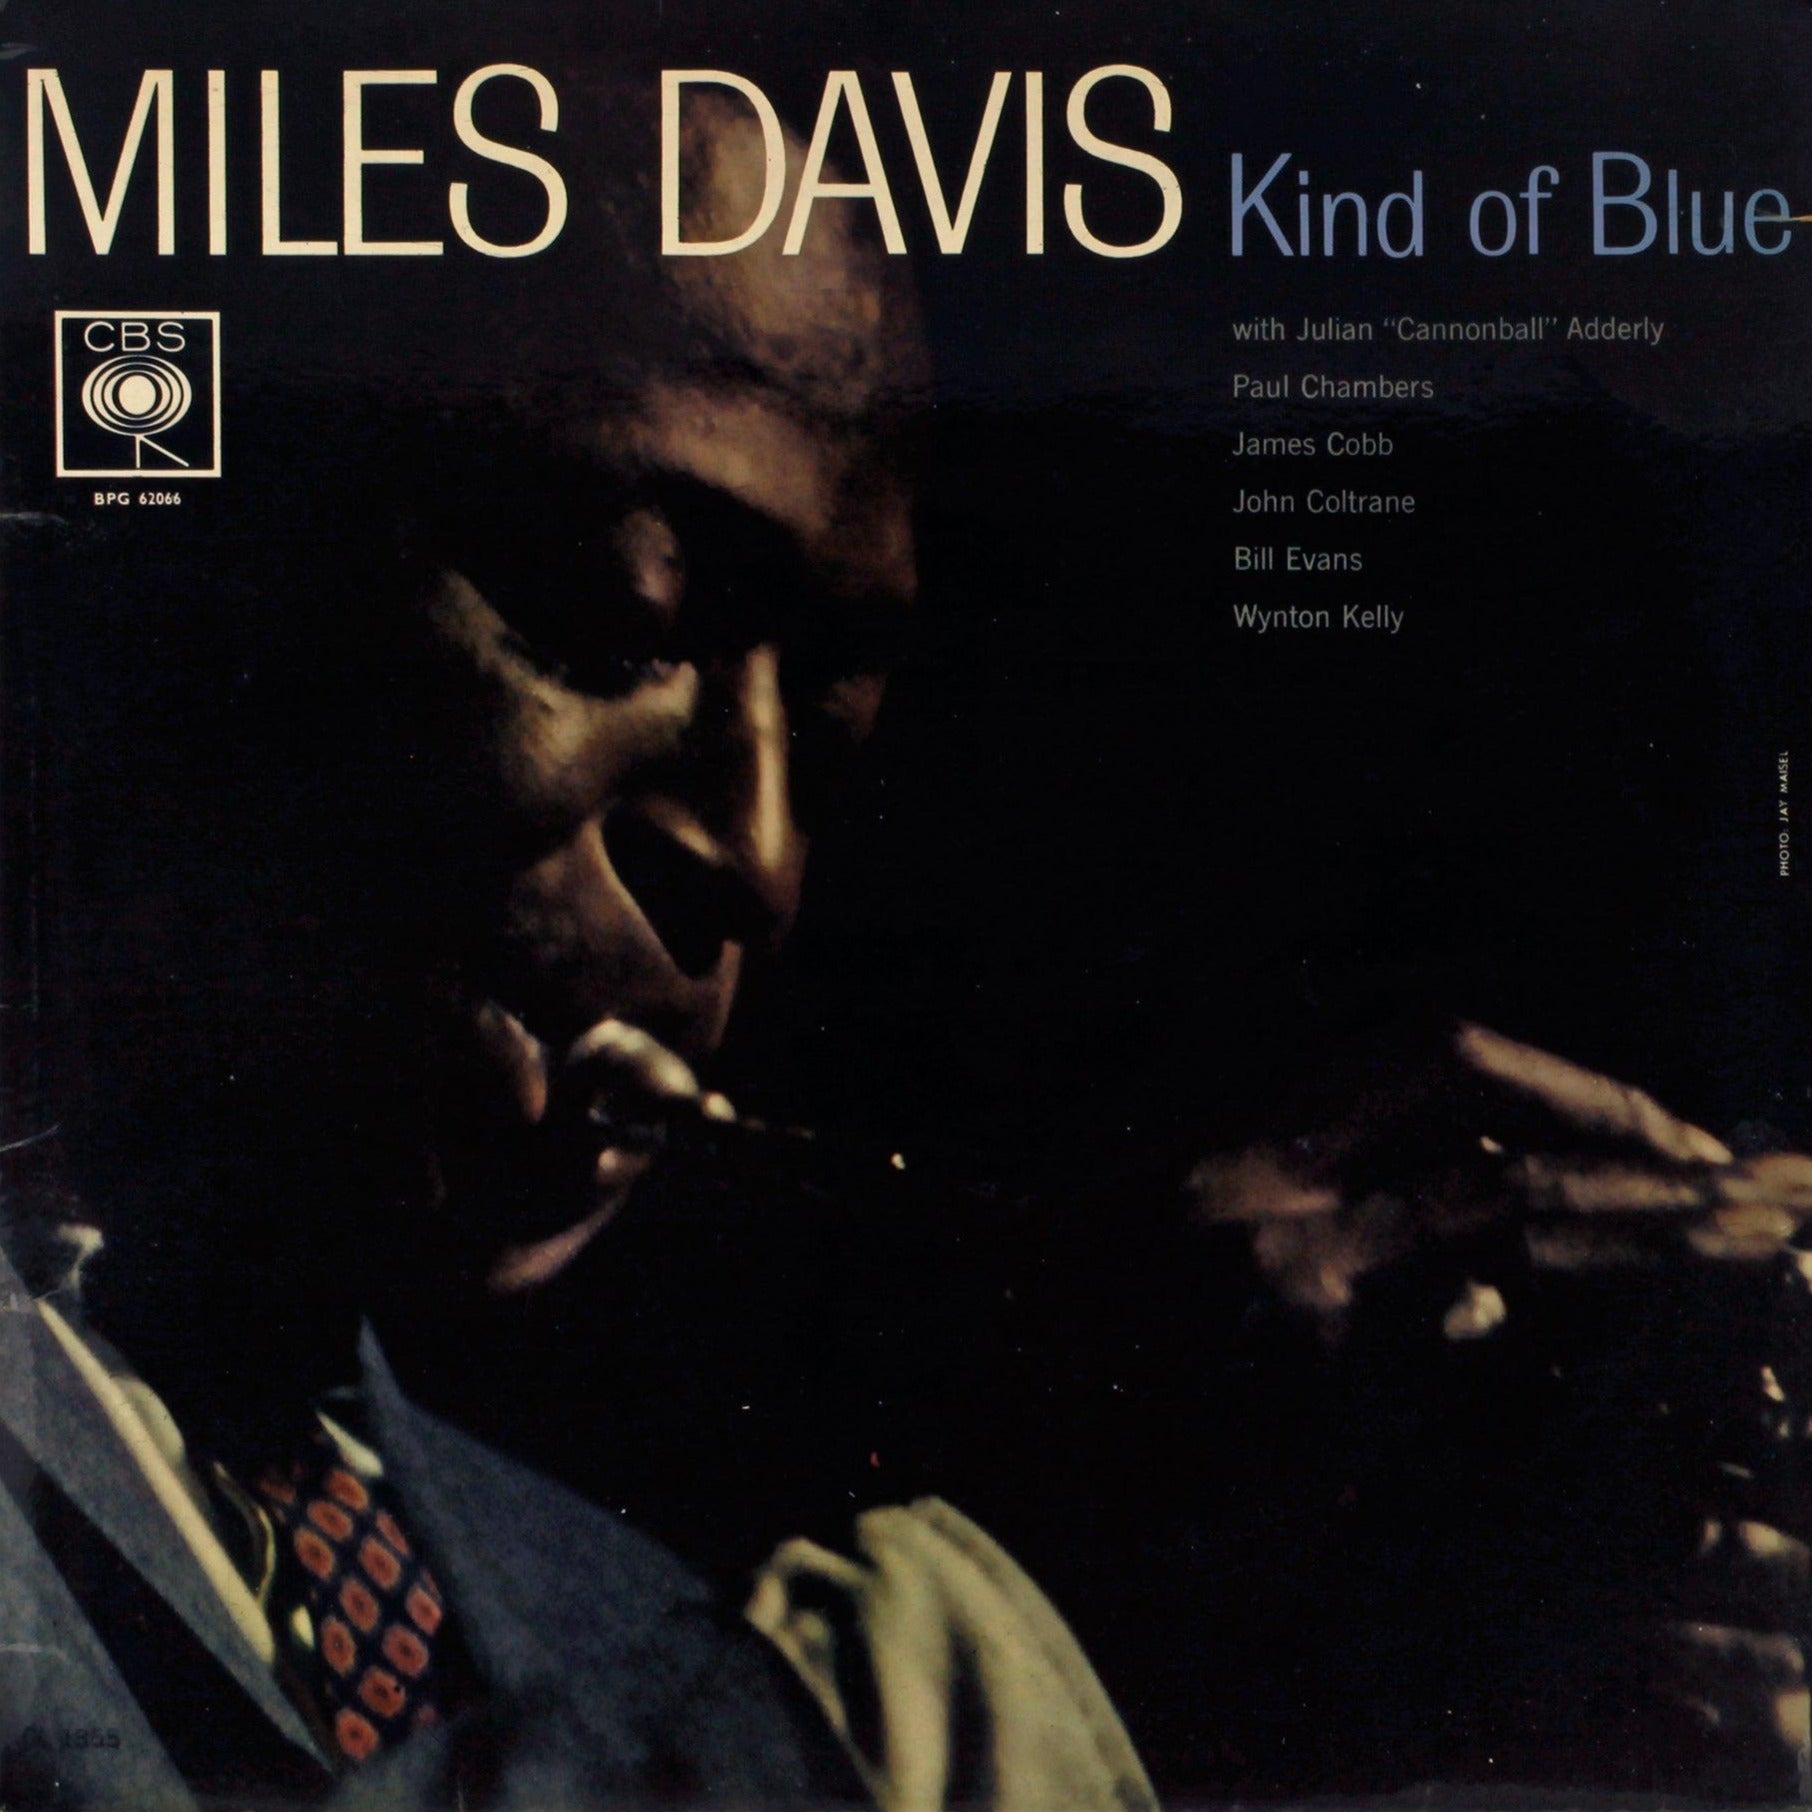 MILES DAVIS - Kind of Blue (Reissue) – Flying Out